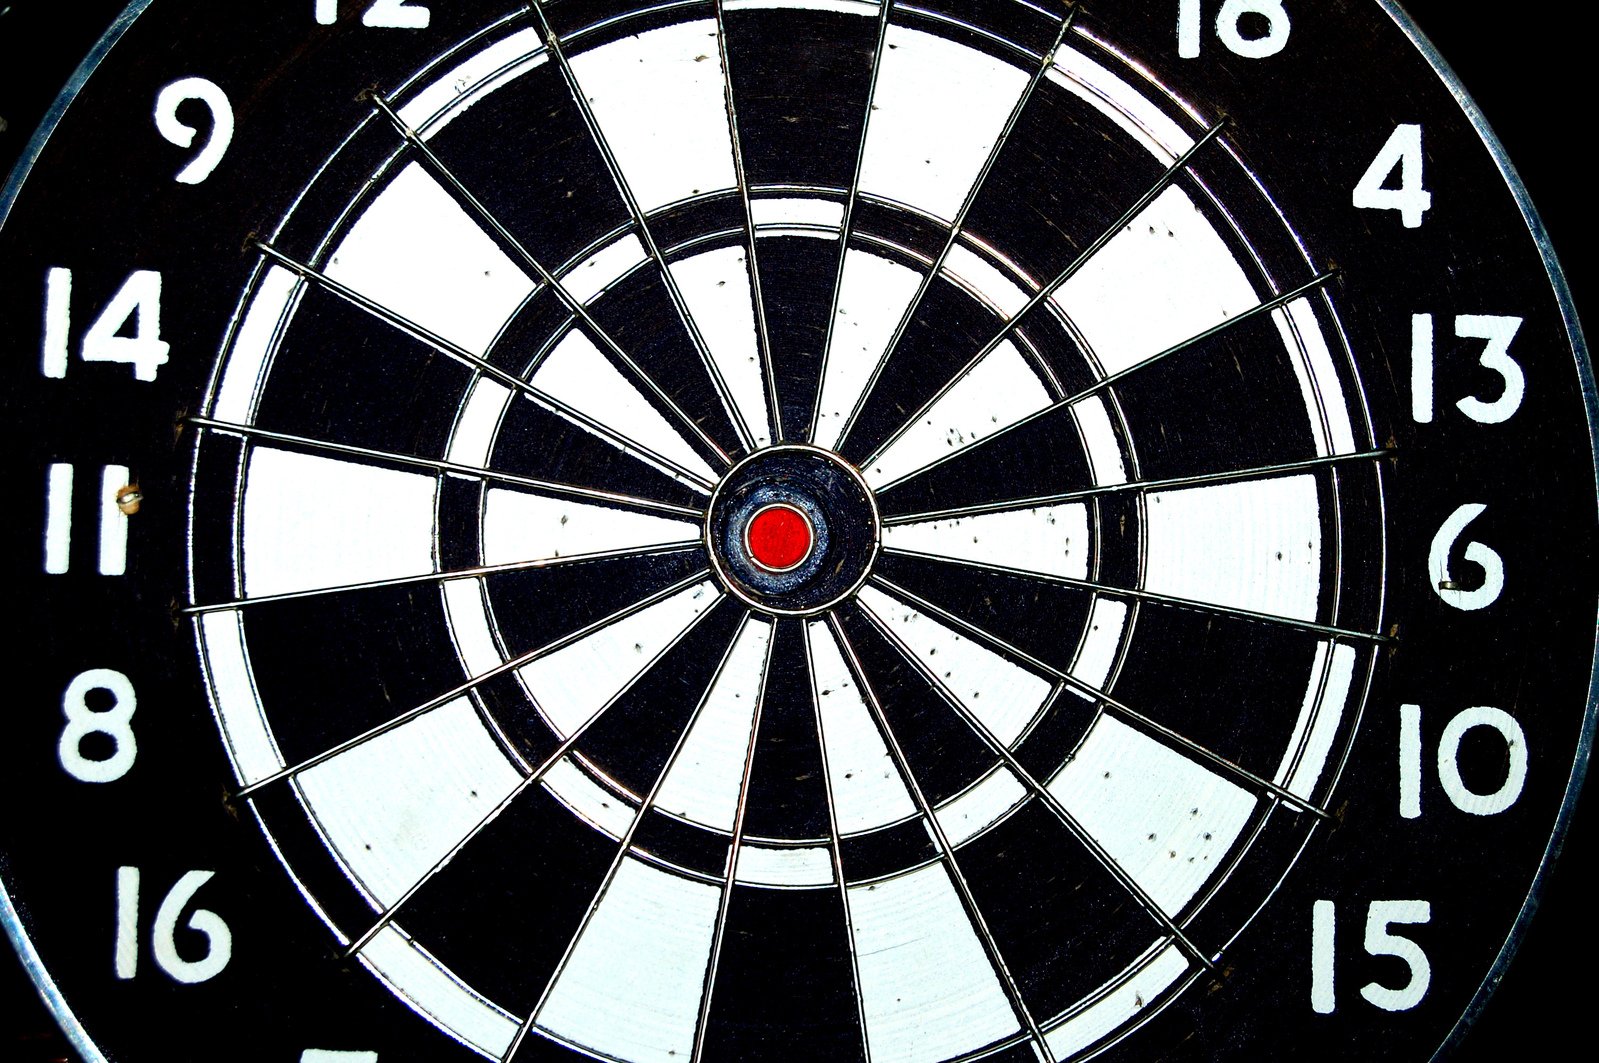 the front of a darts target showing the numbers